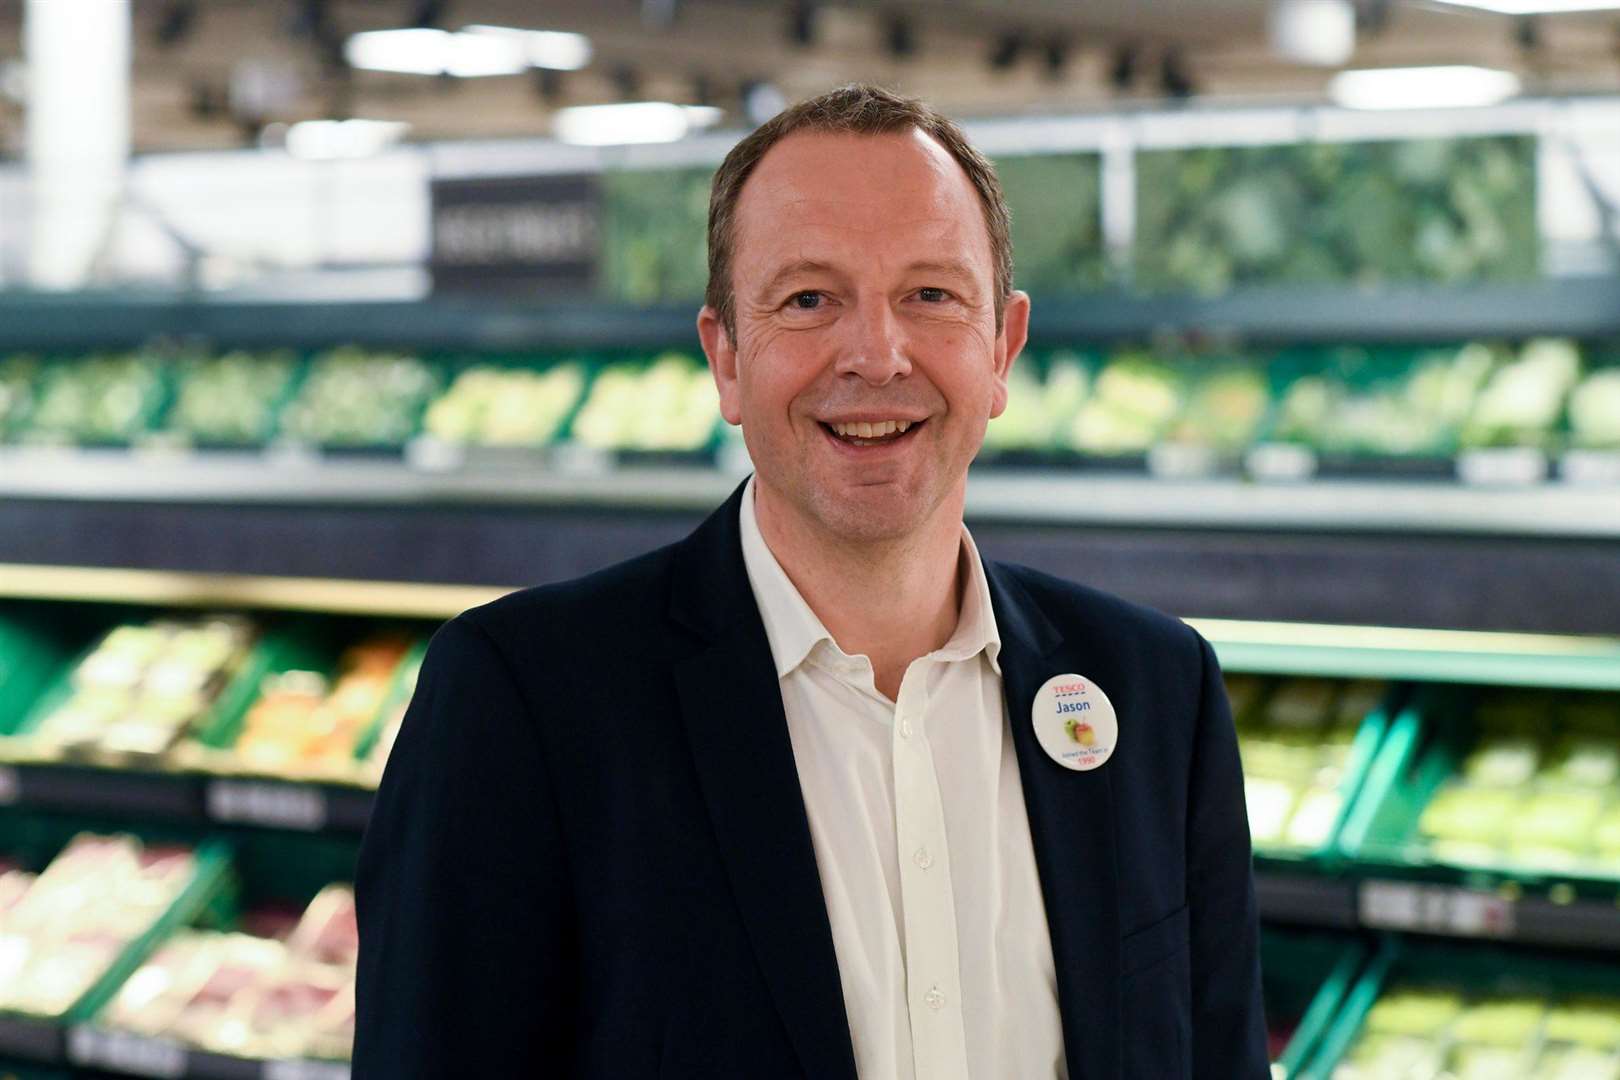 Tesco’s UK and Ireland chief Jason Tarry said it now delivers to 1.5 million customers each week (Tesco/PA)